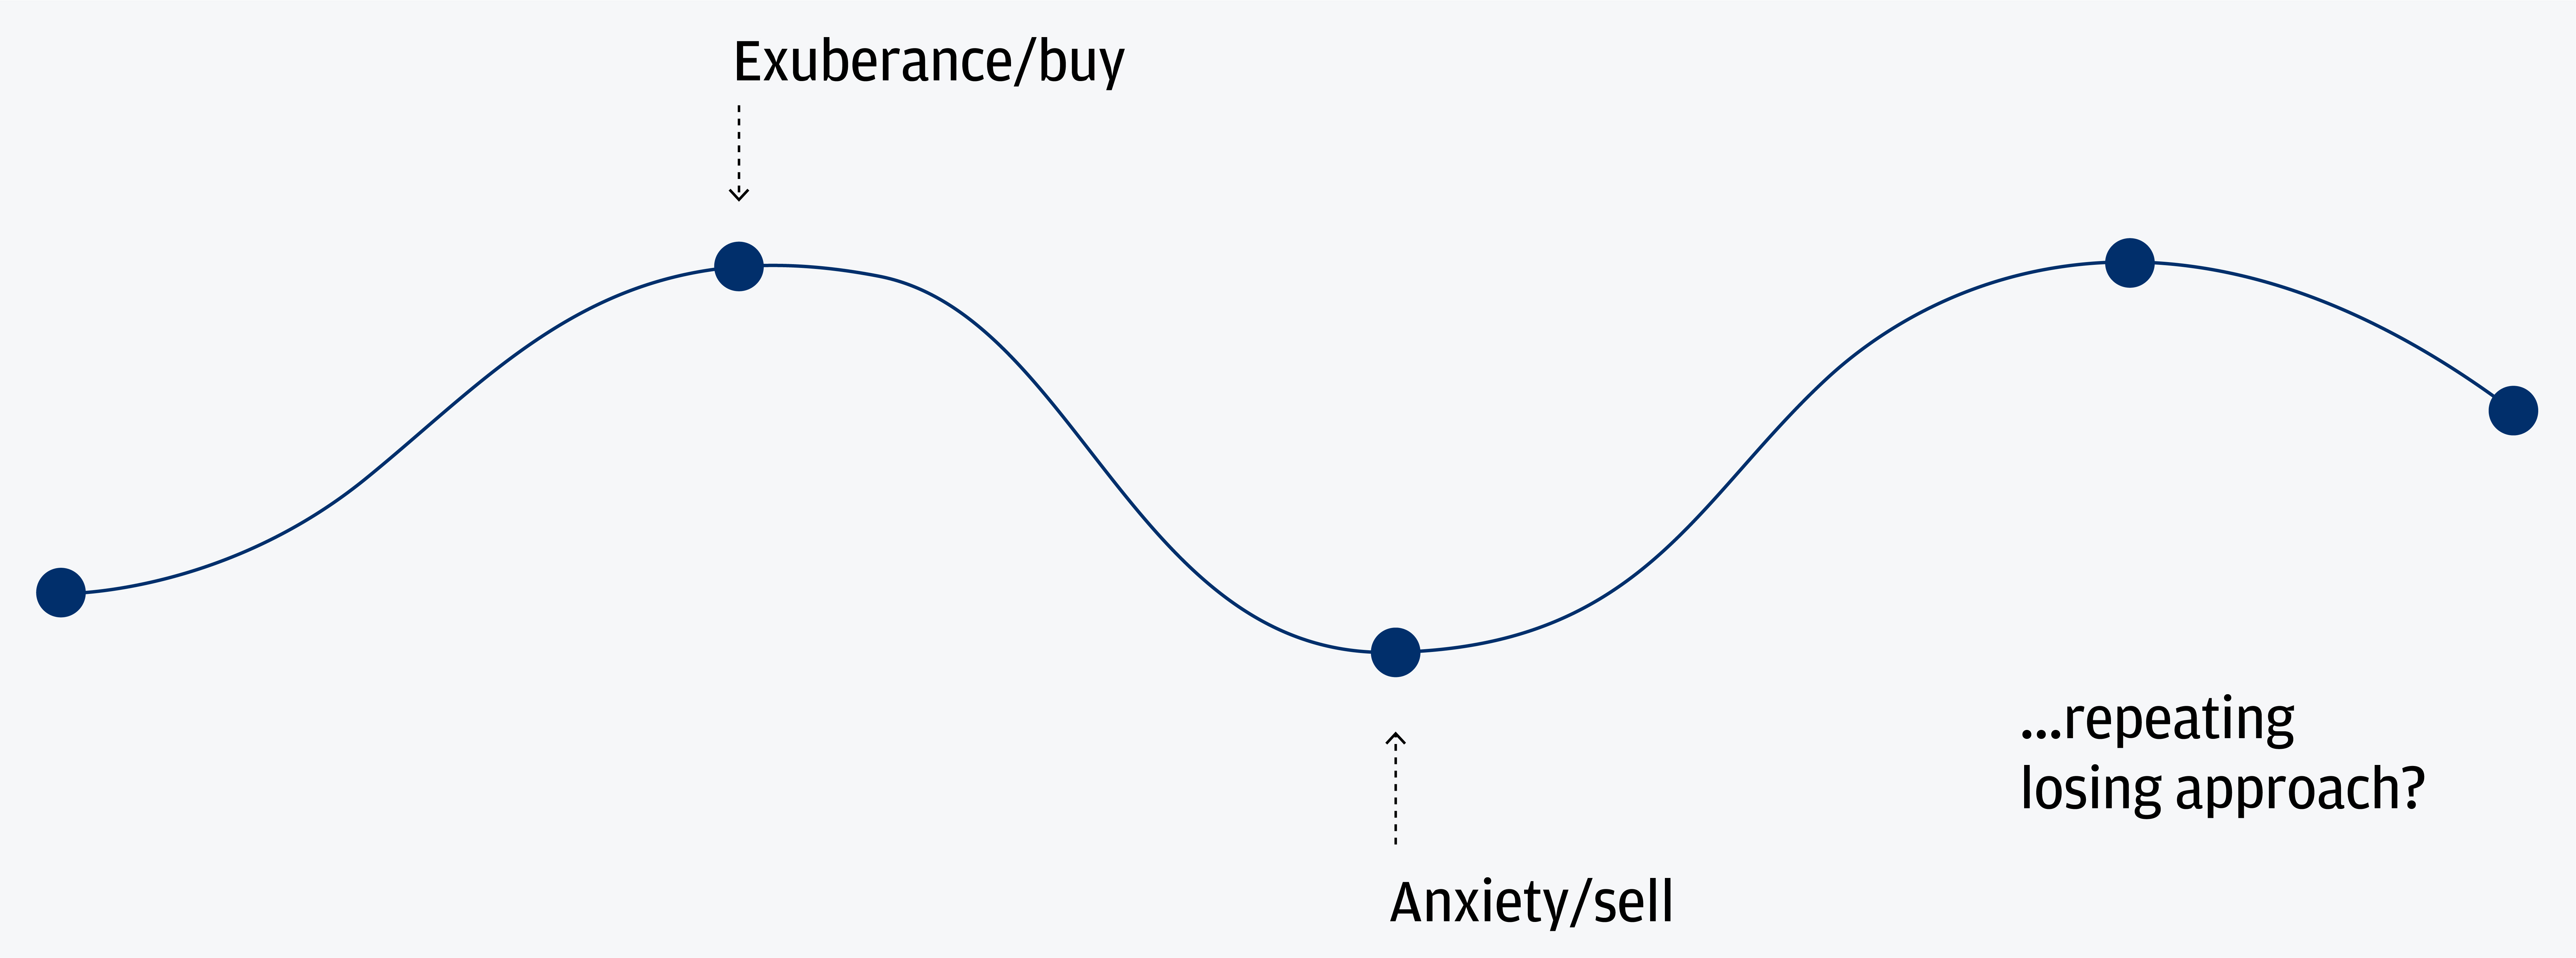 The graphic shows how human emotions affect our investing decisions—begin at a neutral state, head up to an exuberance (when we buy), down to anxiety (when we sell) and continue through the same cycle again.